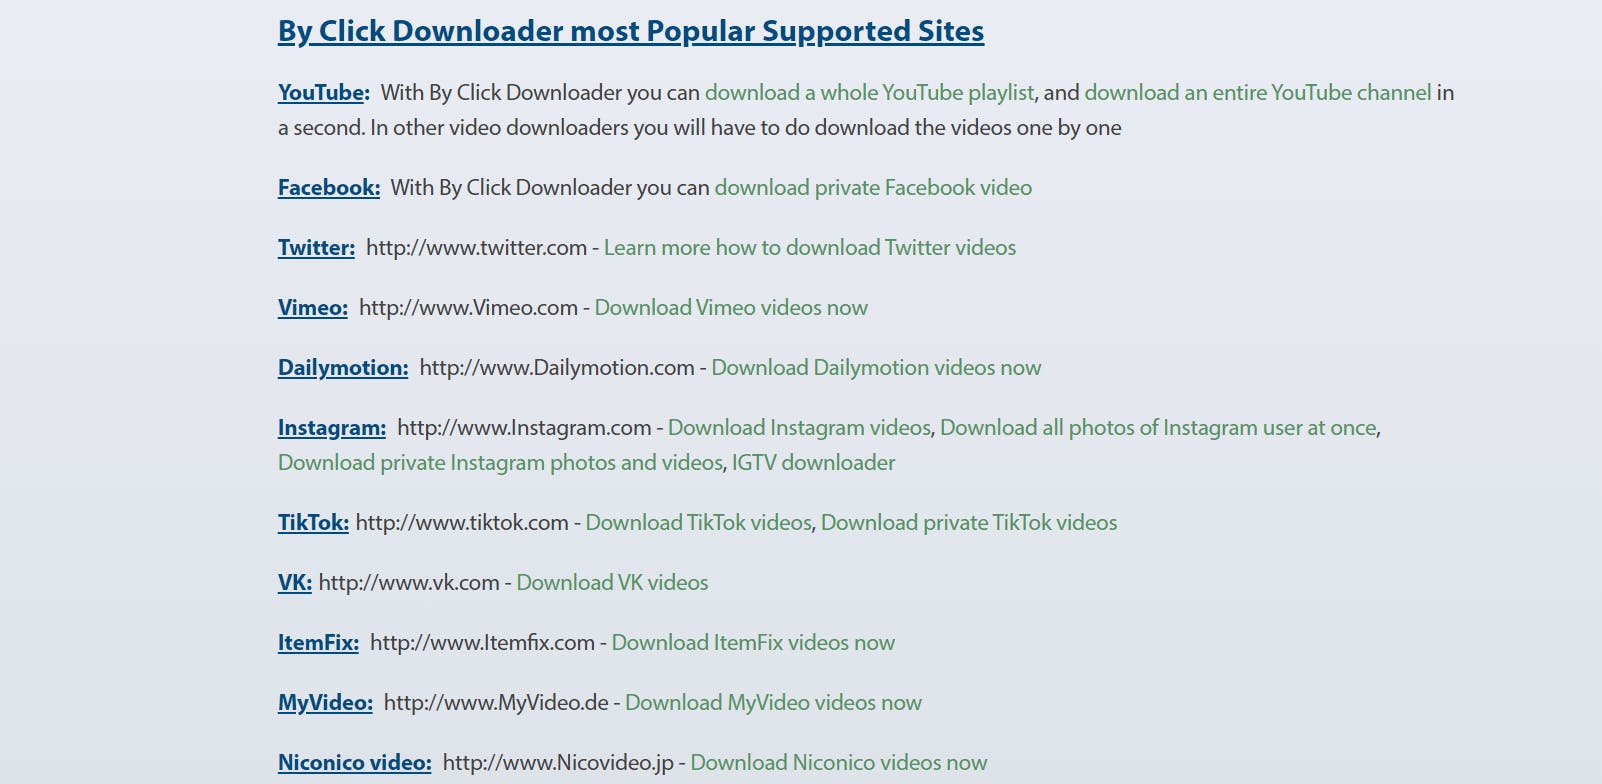 by click downloader supported sites